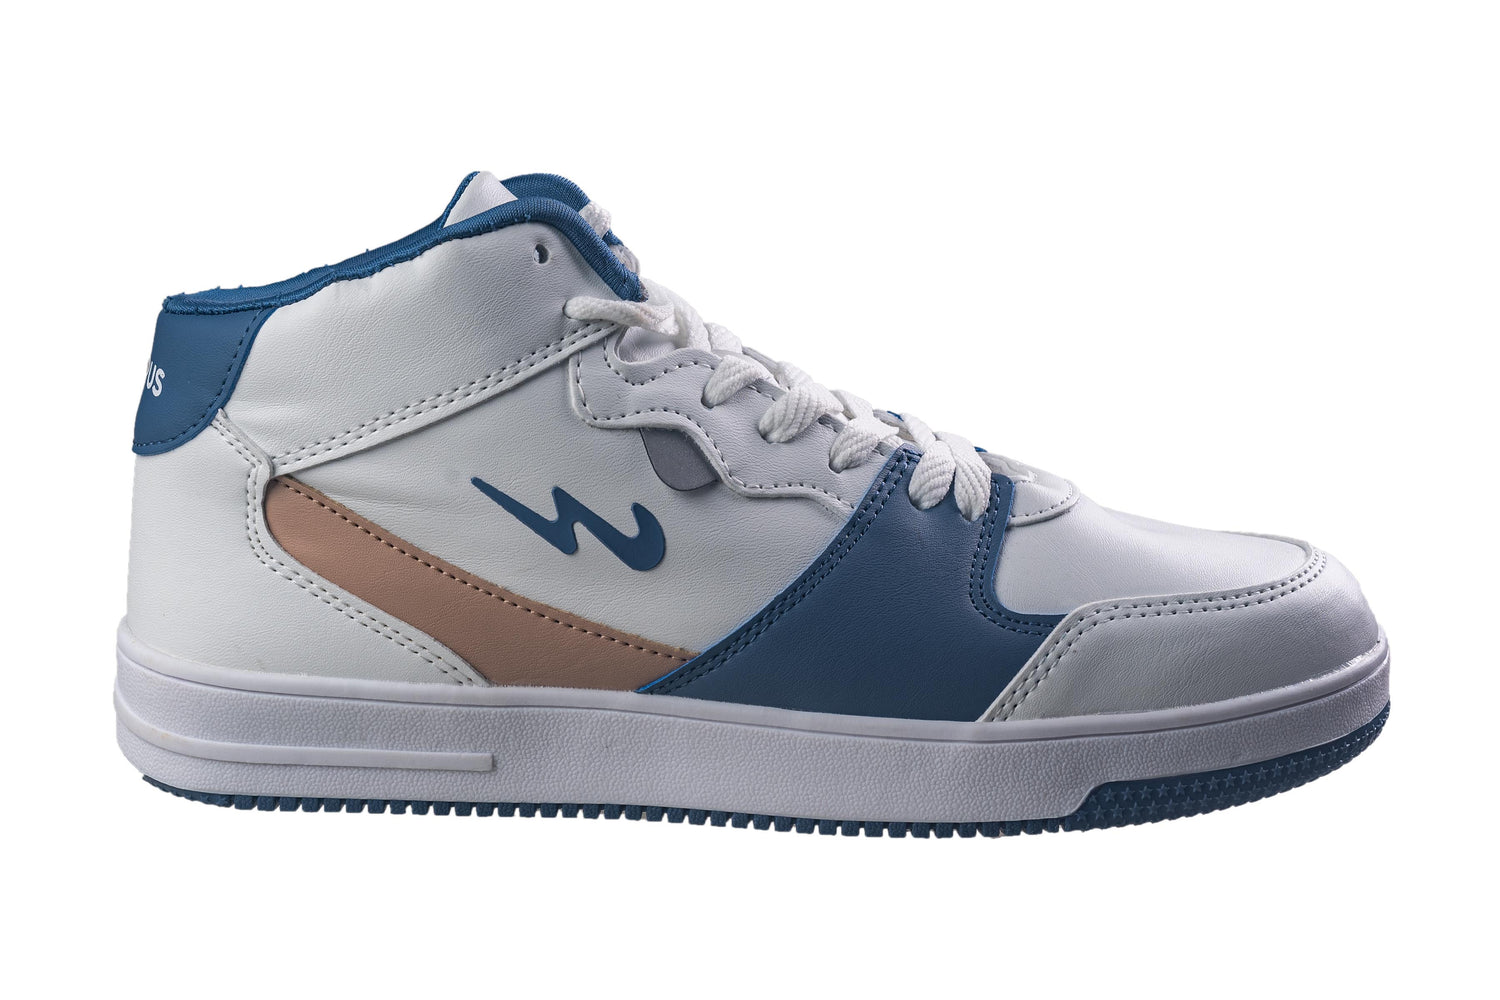 Campus White / R. Slate Gents Sports Shoe